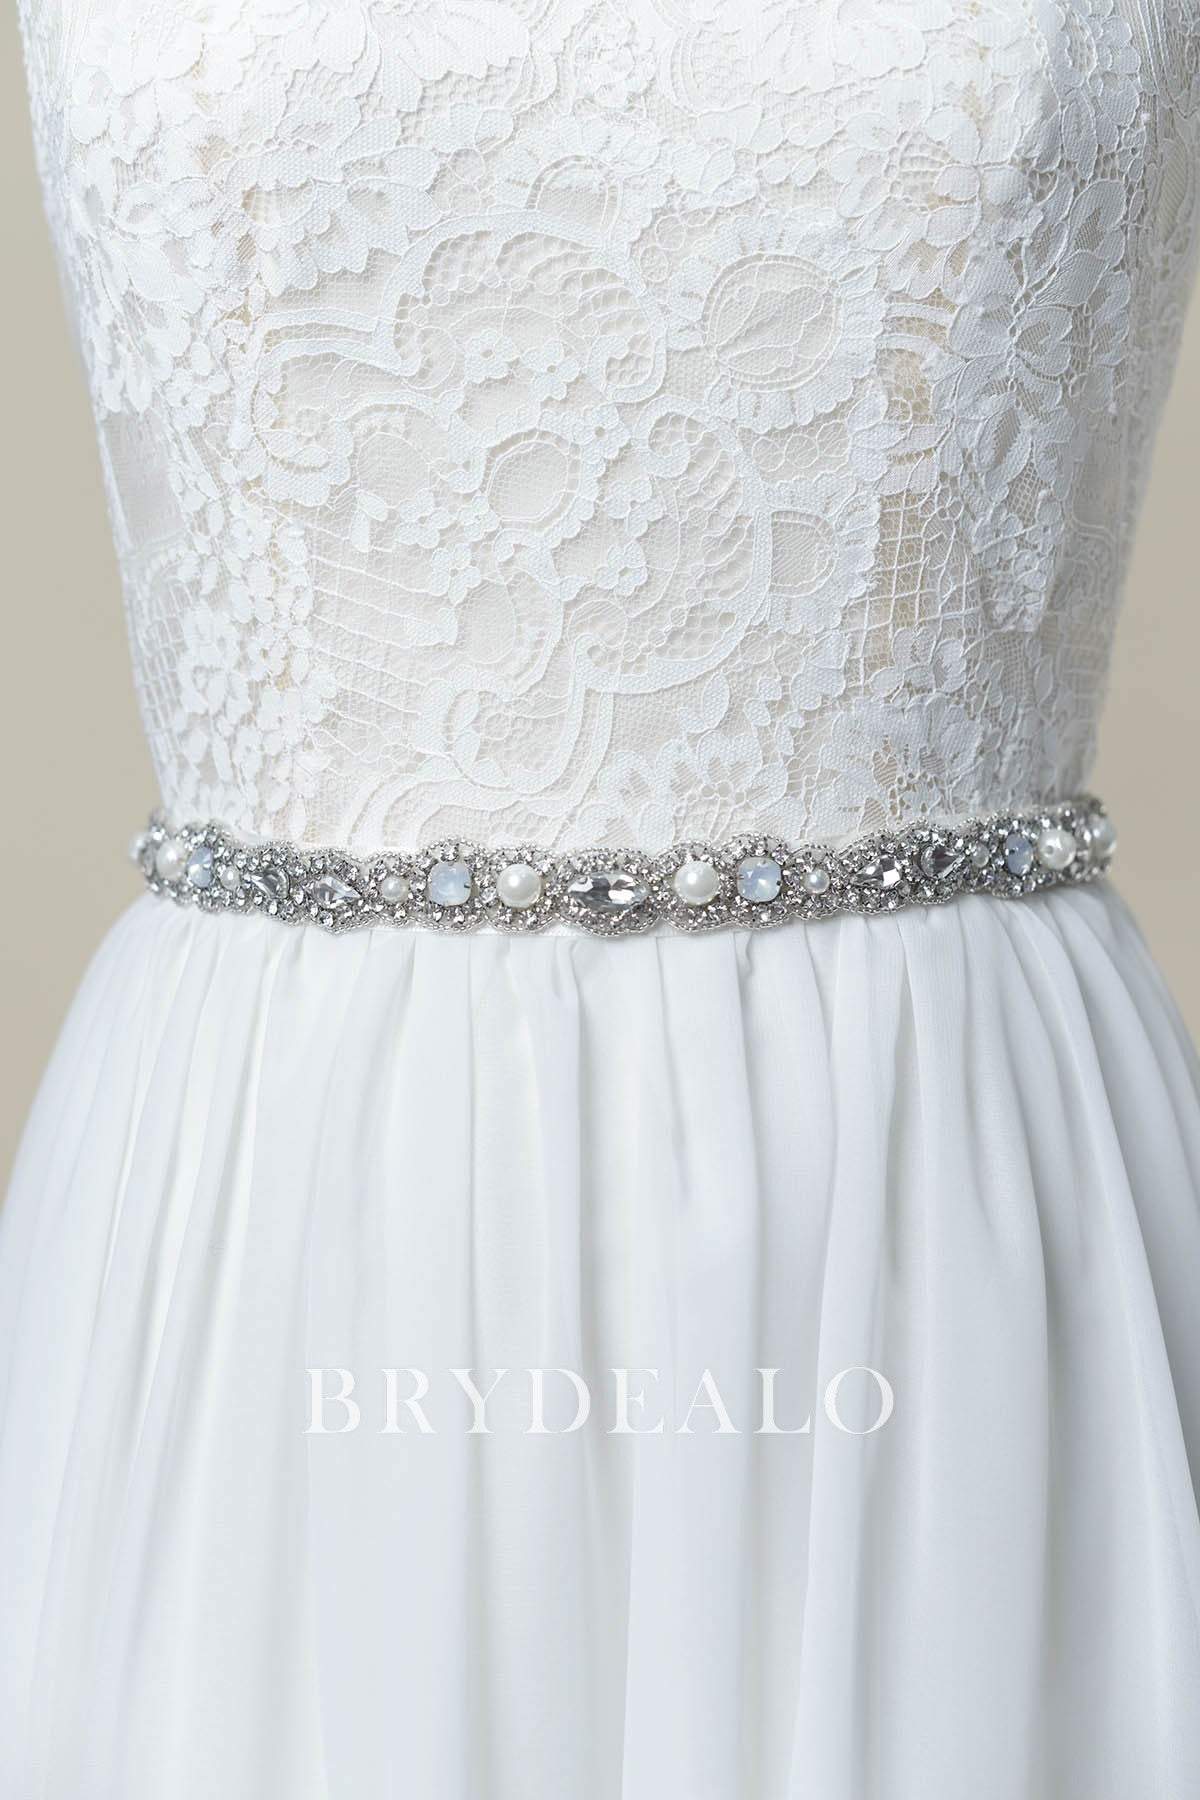 Scalloped Dusty Blue Accents Sparkly Bridal Sash